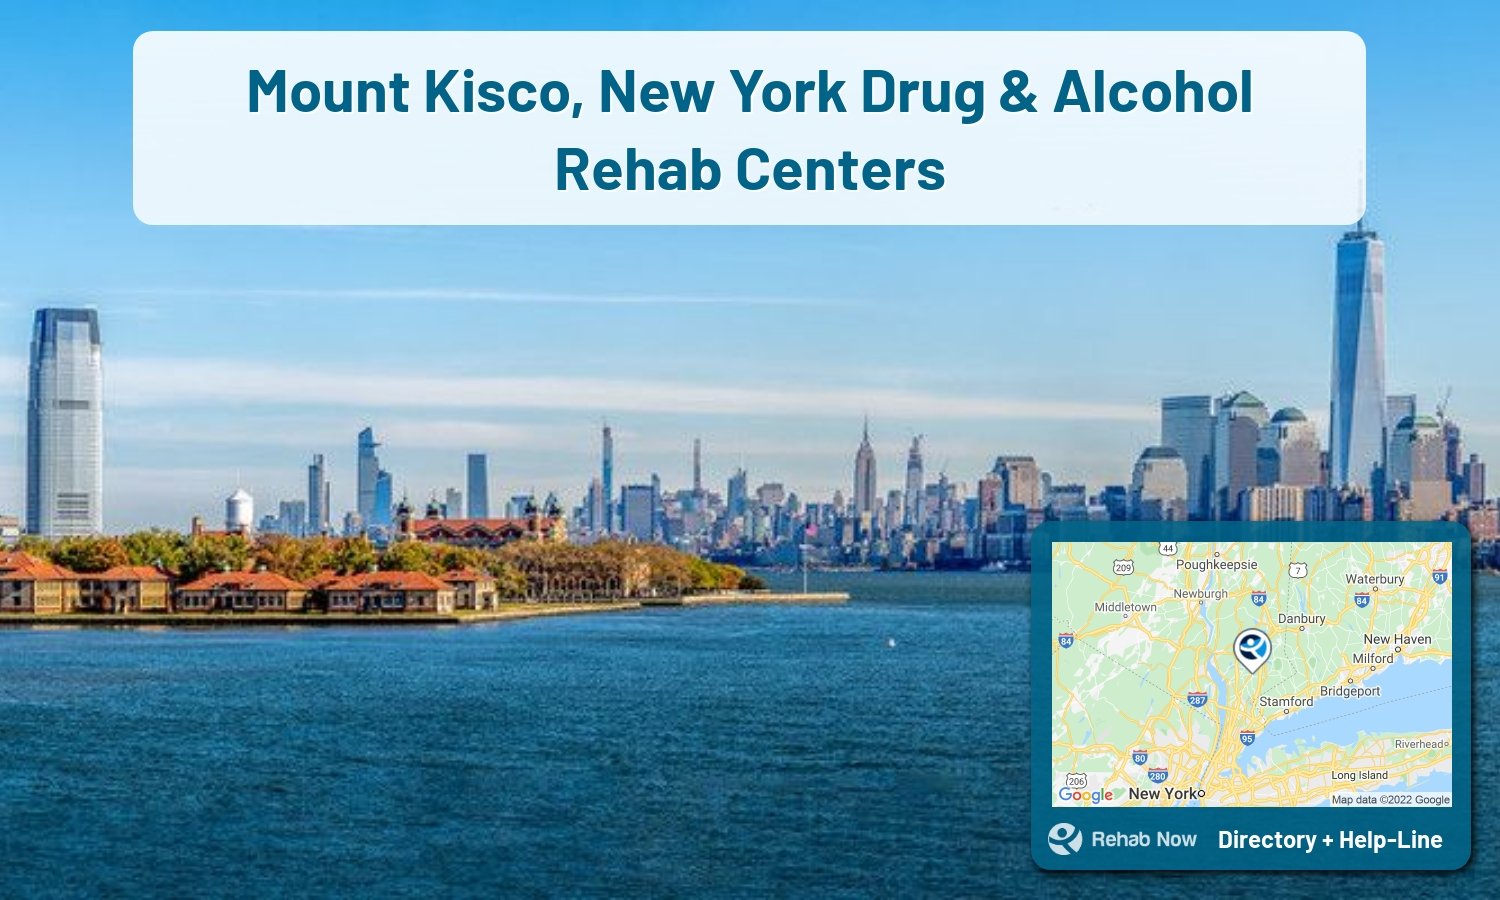 Need treatment nearby in Mount Kisco, New York? Choose a drug/alcohol rehab center from our list, or call our hotline now for free help.